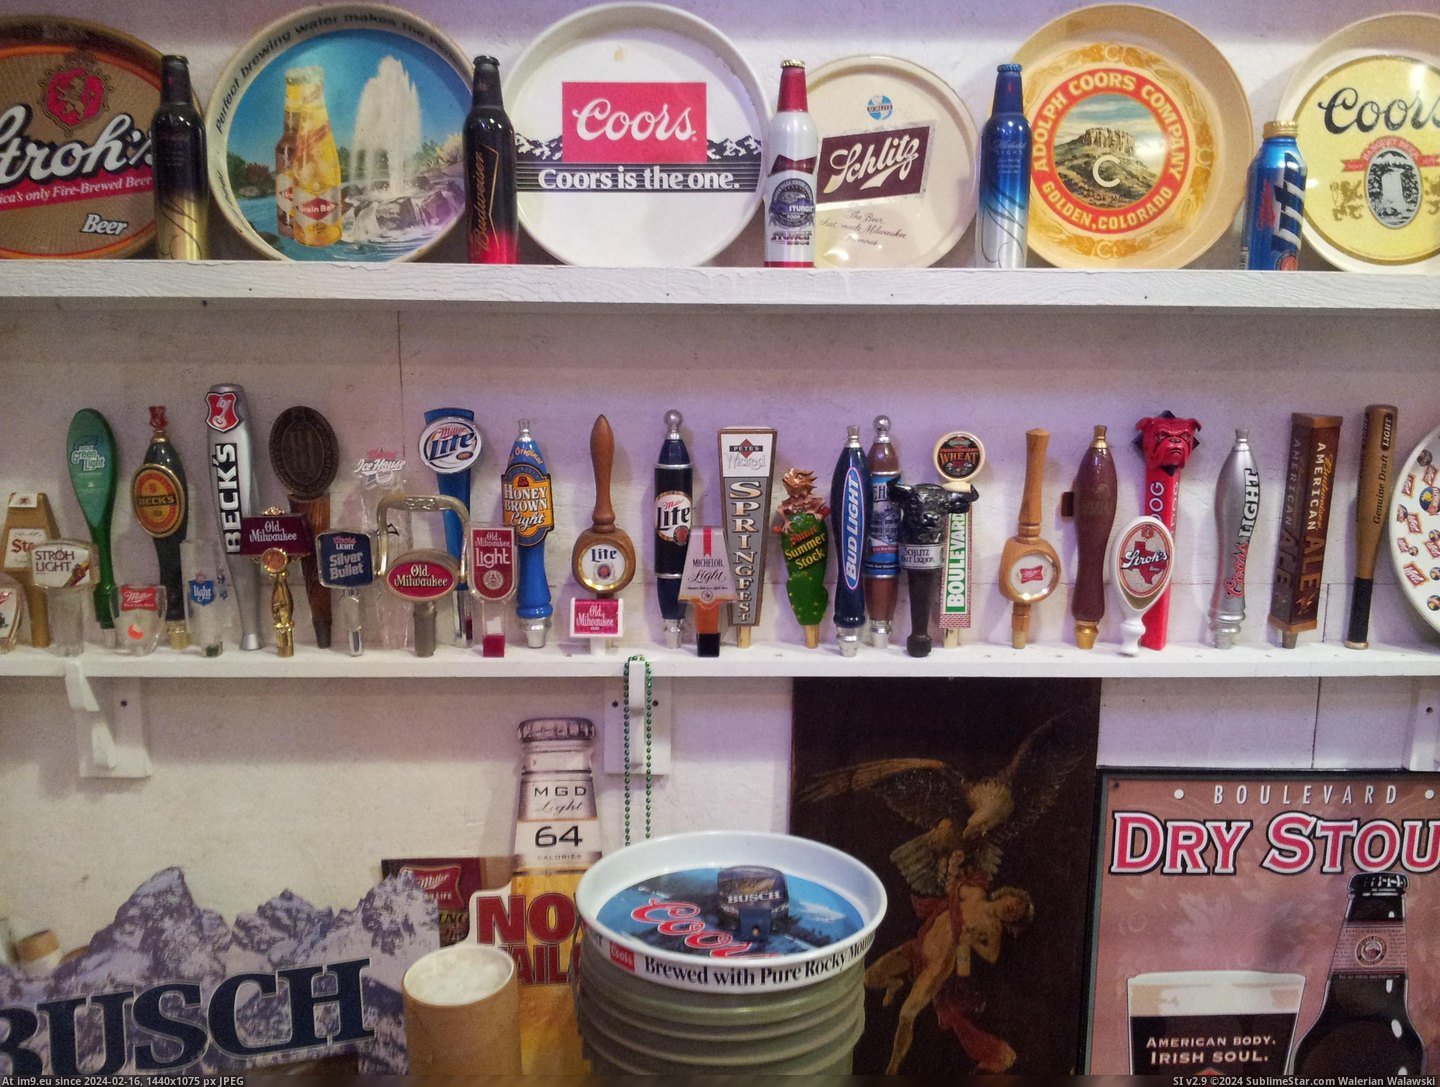 #Collection #For #Years #Grandpa #Cans #Collecting #Share #Thought #Beer [Pics] My grandpa has been collecting beer cans for over thirty years, so I thought I would go ahead and share his collection wi Pic. (Obraz z album My r/PICS favs))